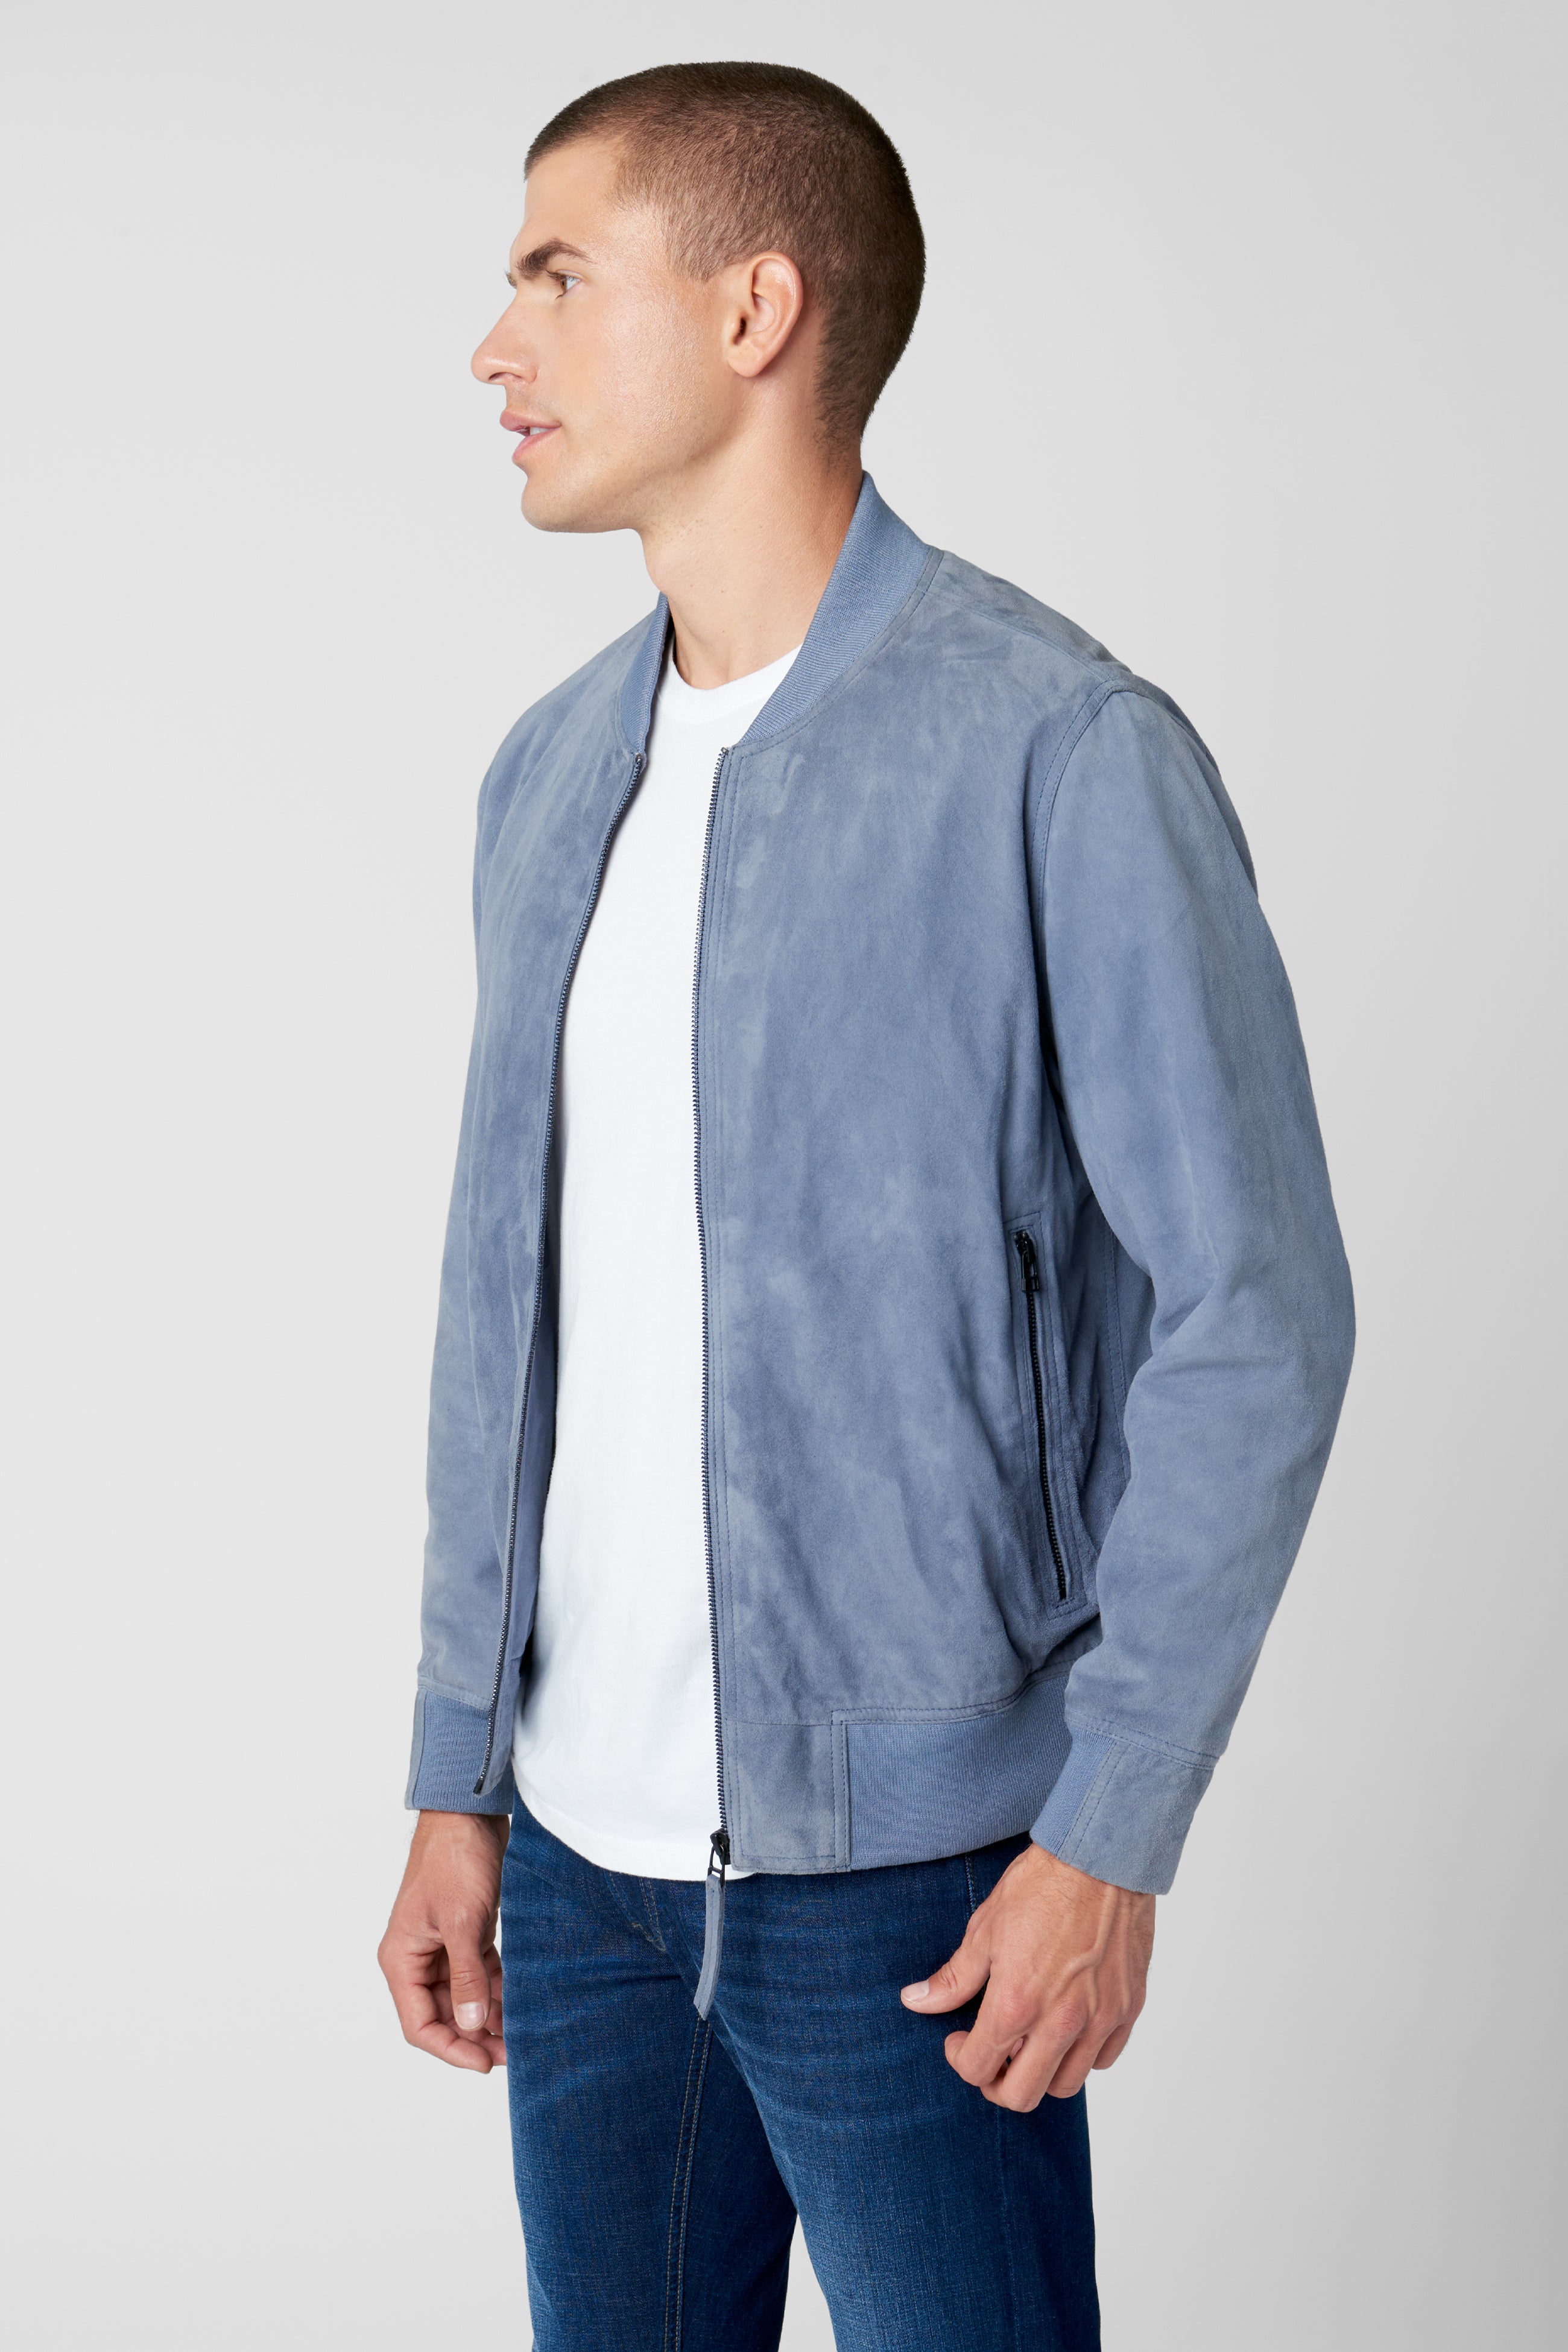 Back In The Saddle Bomber